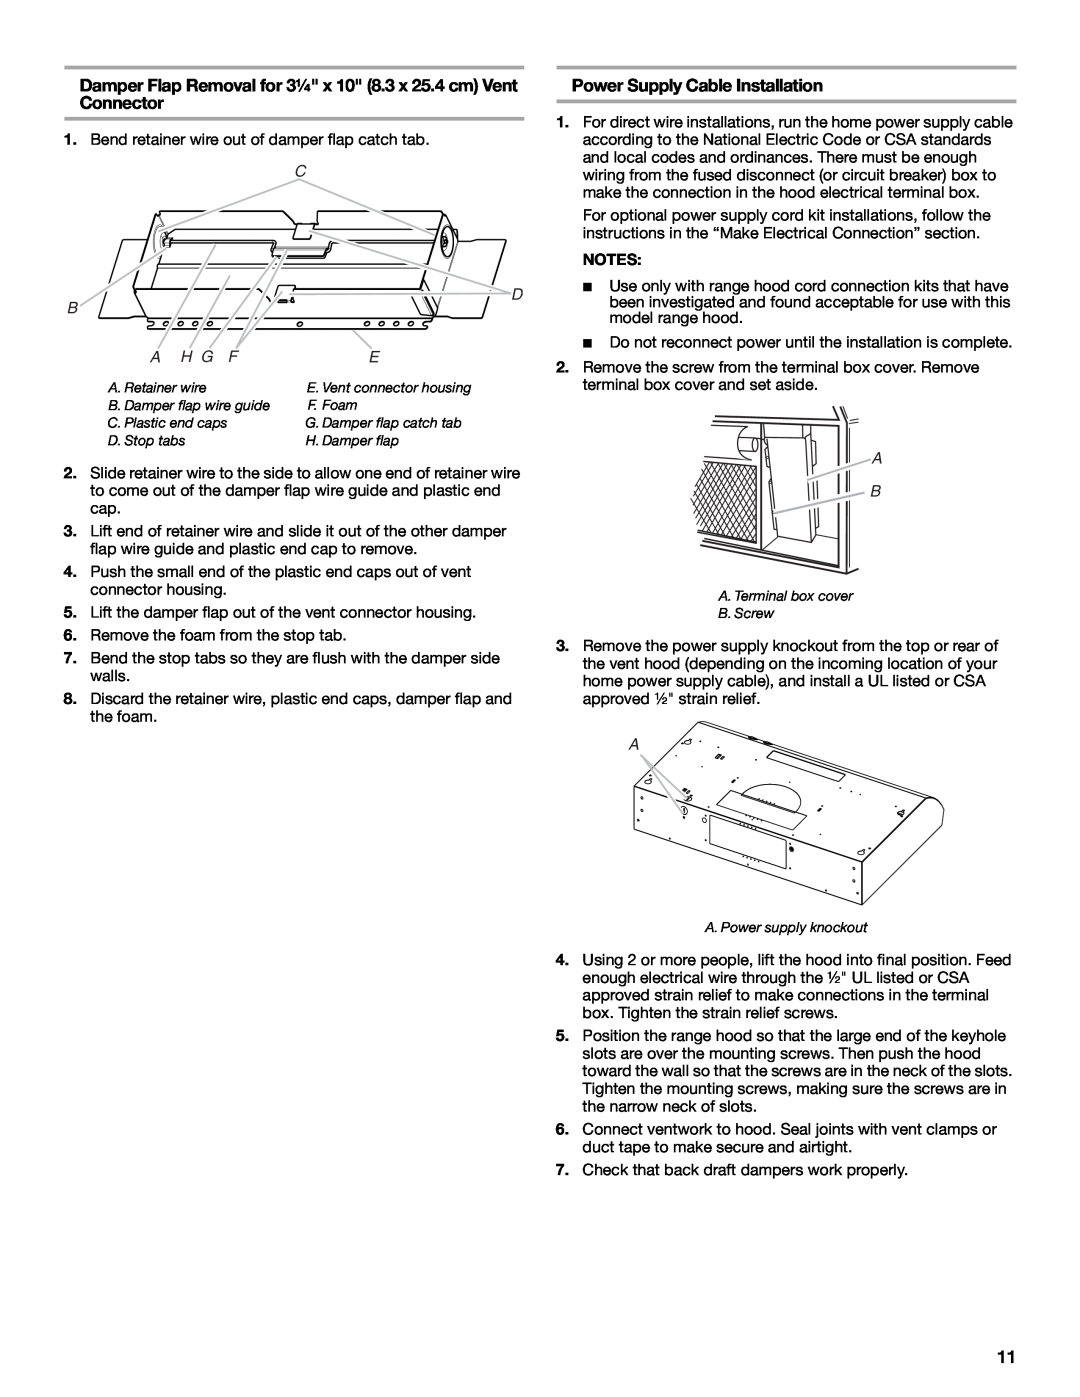 Whirlpool UXT4230AD, UXT4236AD installation instructions Power Supply Cable Installation, C D B, A H G F 